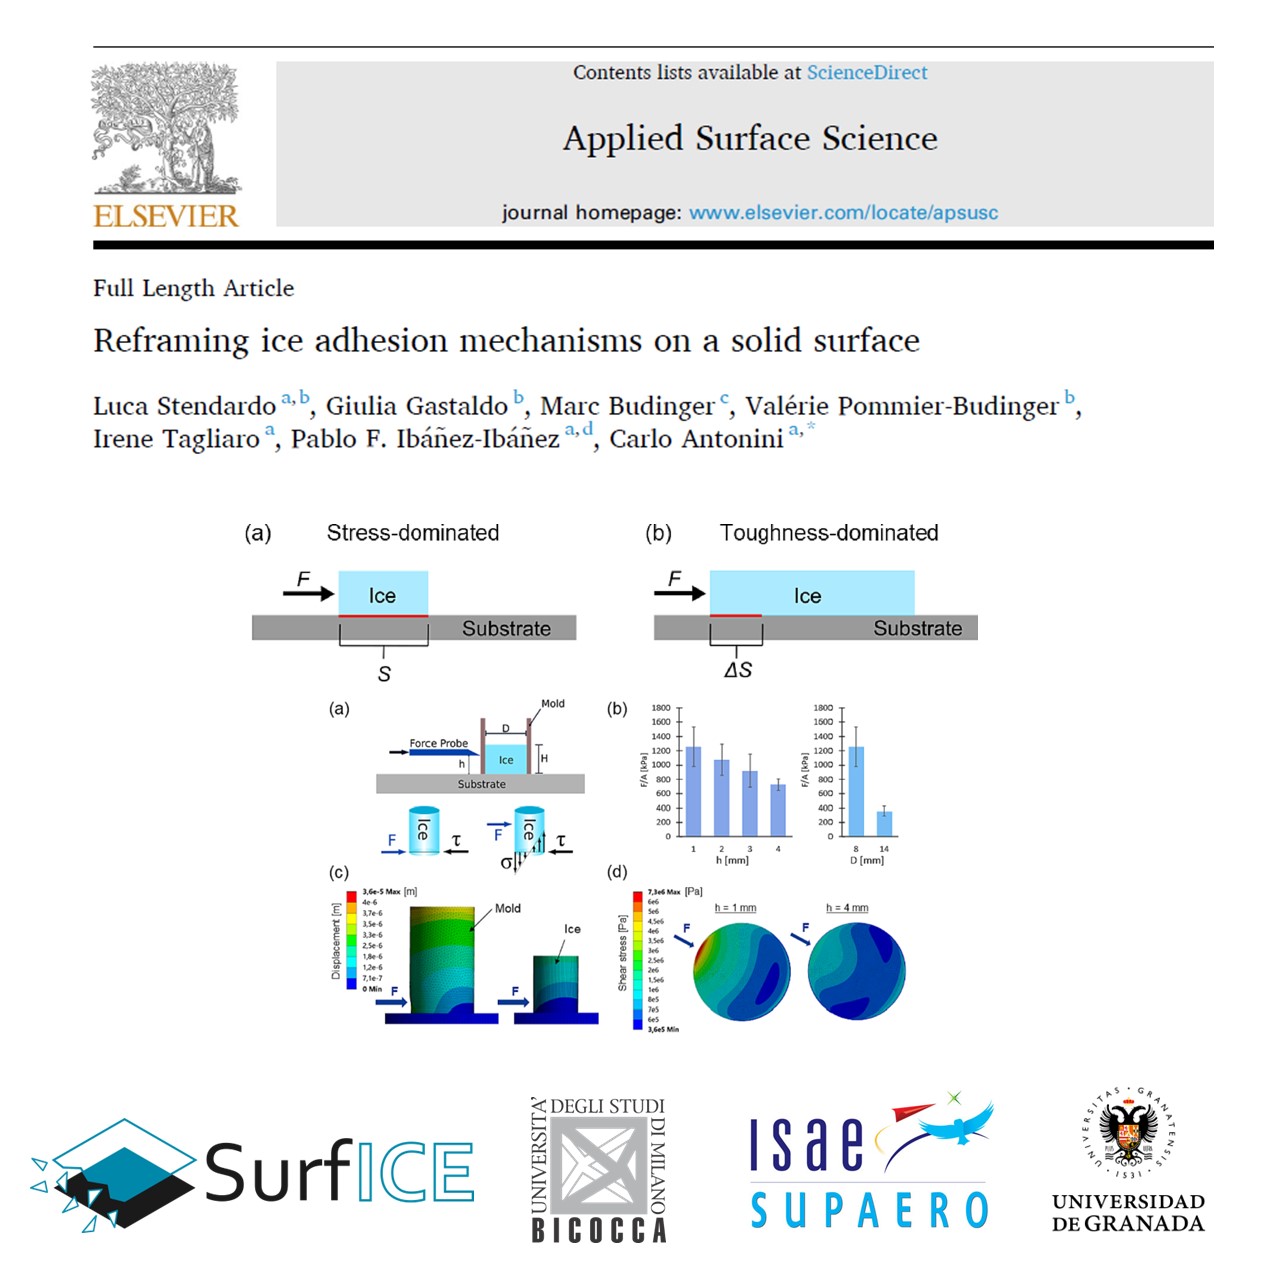 “Reframing ice adhesion mechanisms on a solid surface” is the most recent publication whitin the SURFICE project